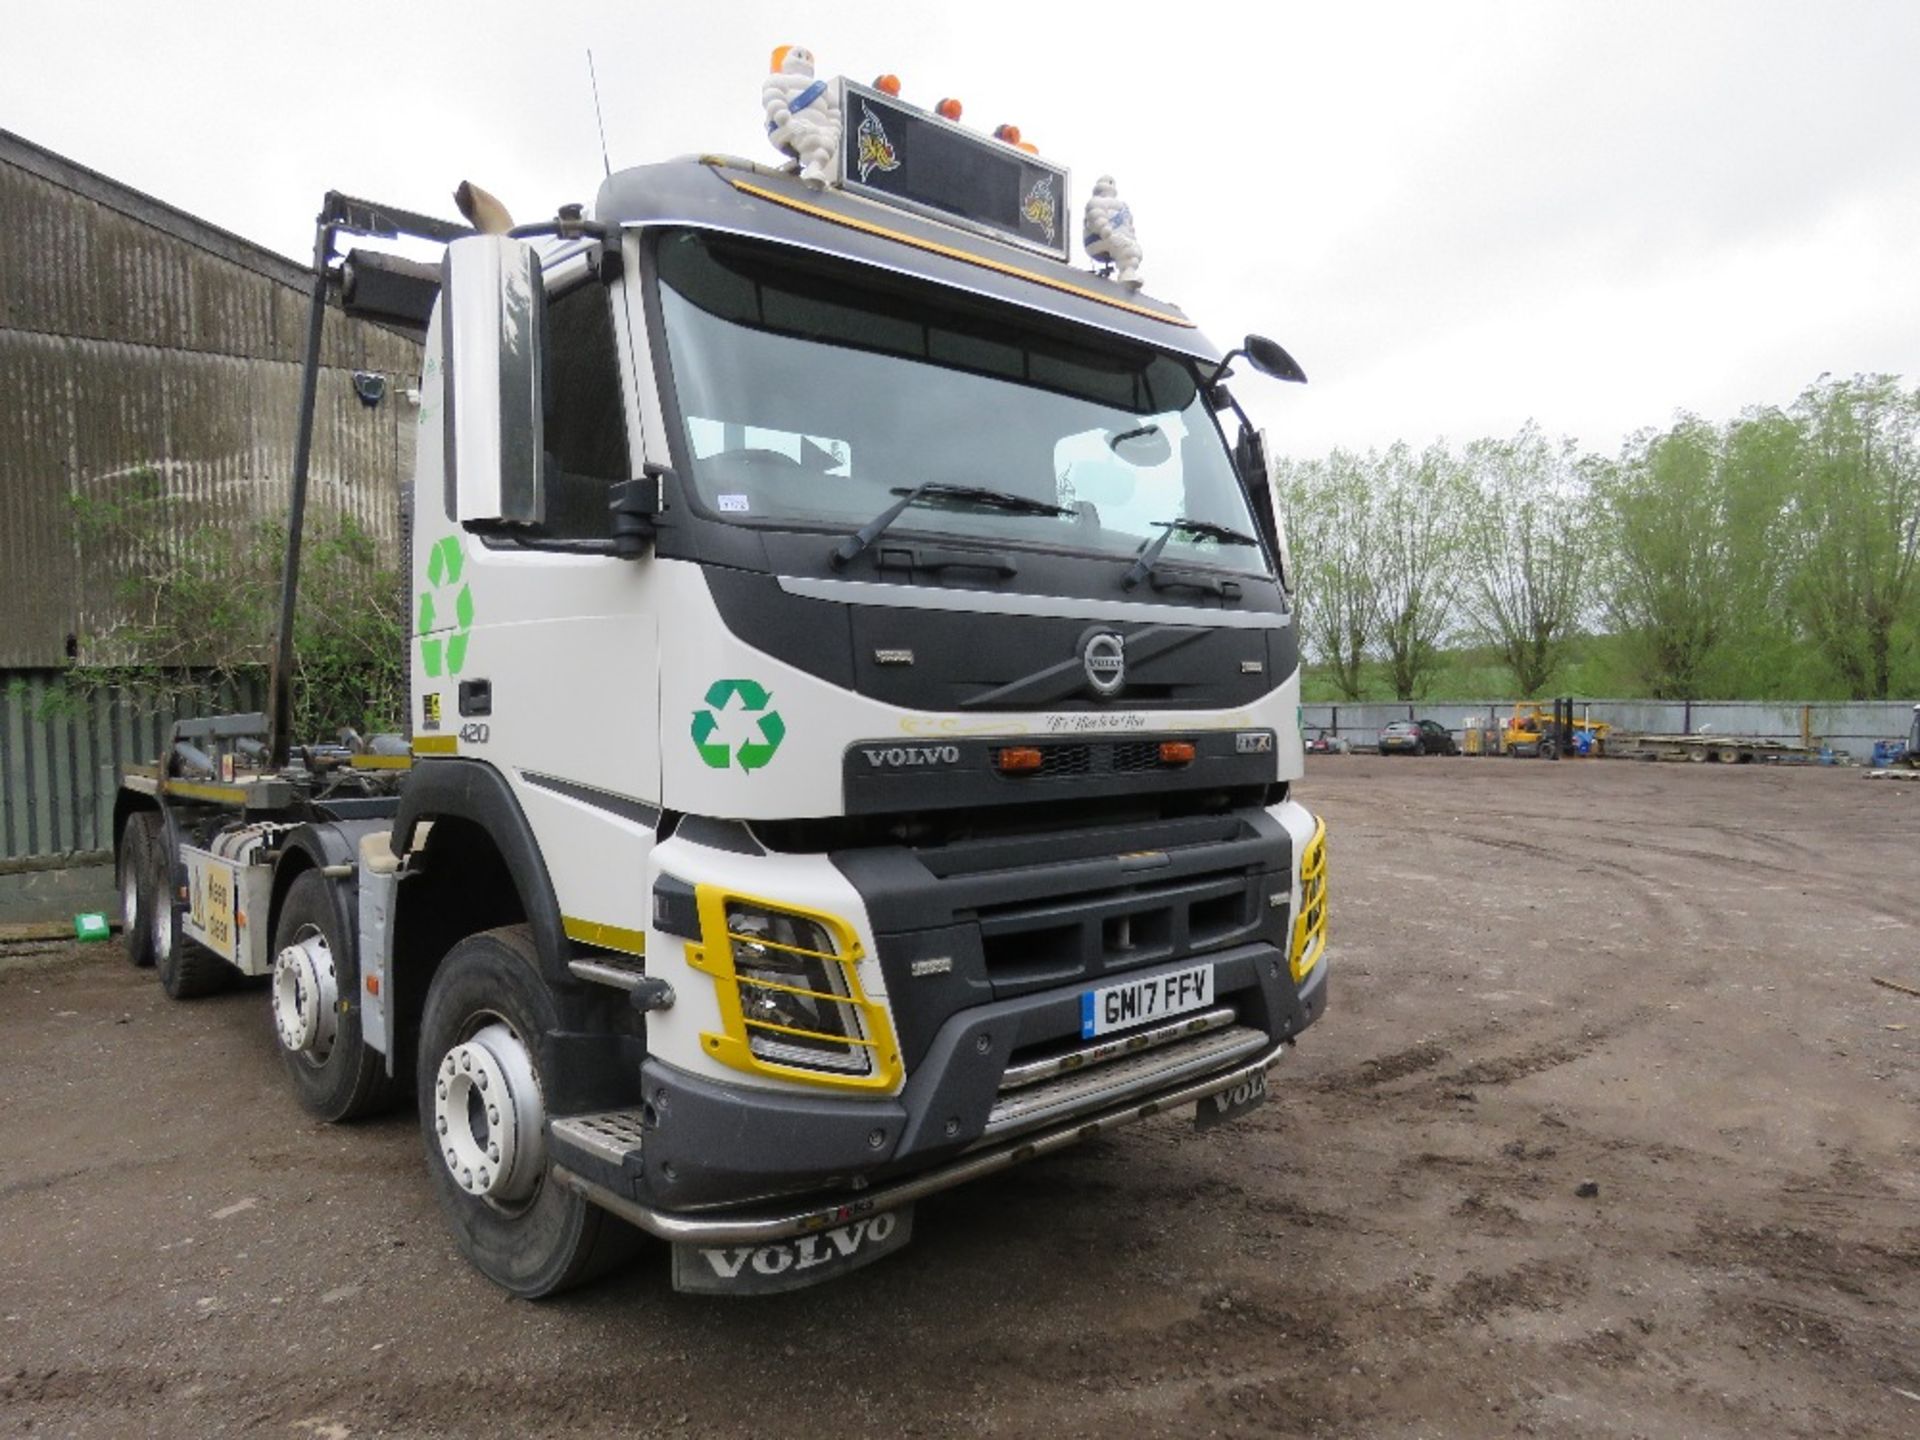 VOLVO FMX420 HOOK LOADER SKIP LORRY, 8X4 REG:GM17 FFV. WITH V5, OWNED BY VENDOR FROM NEW. DIRECT FR - Image 2 of 26